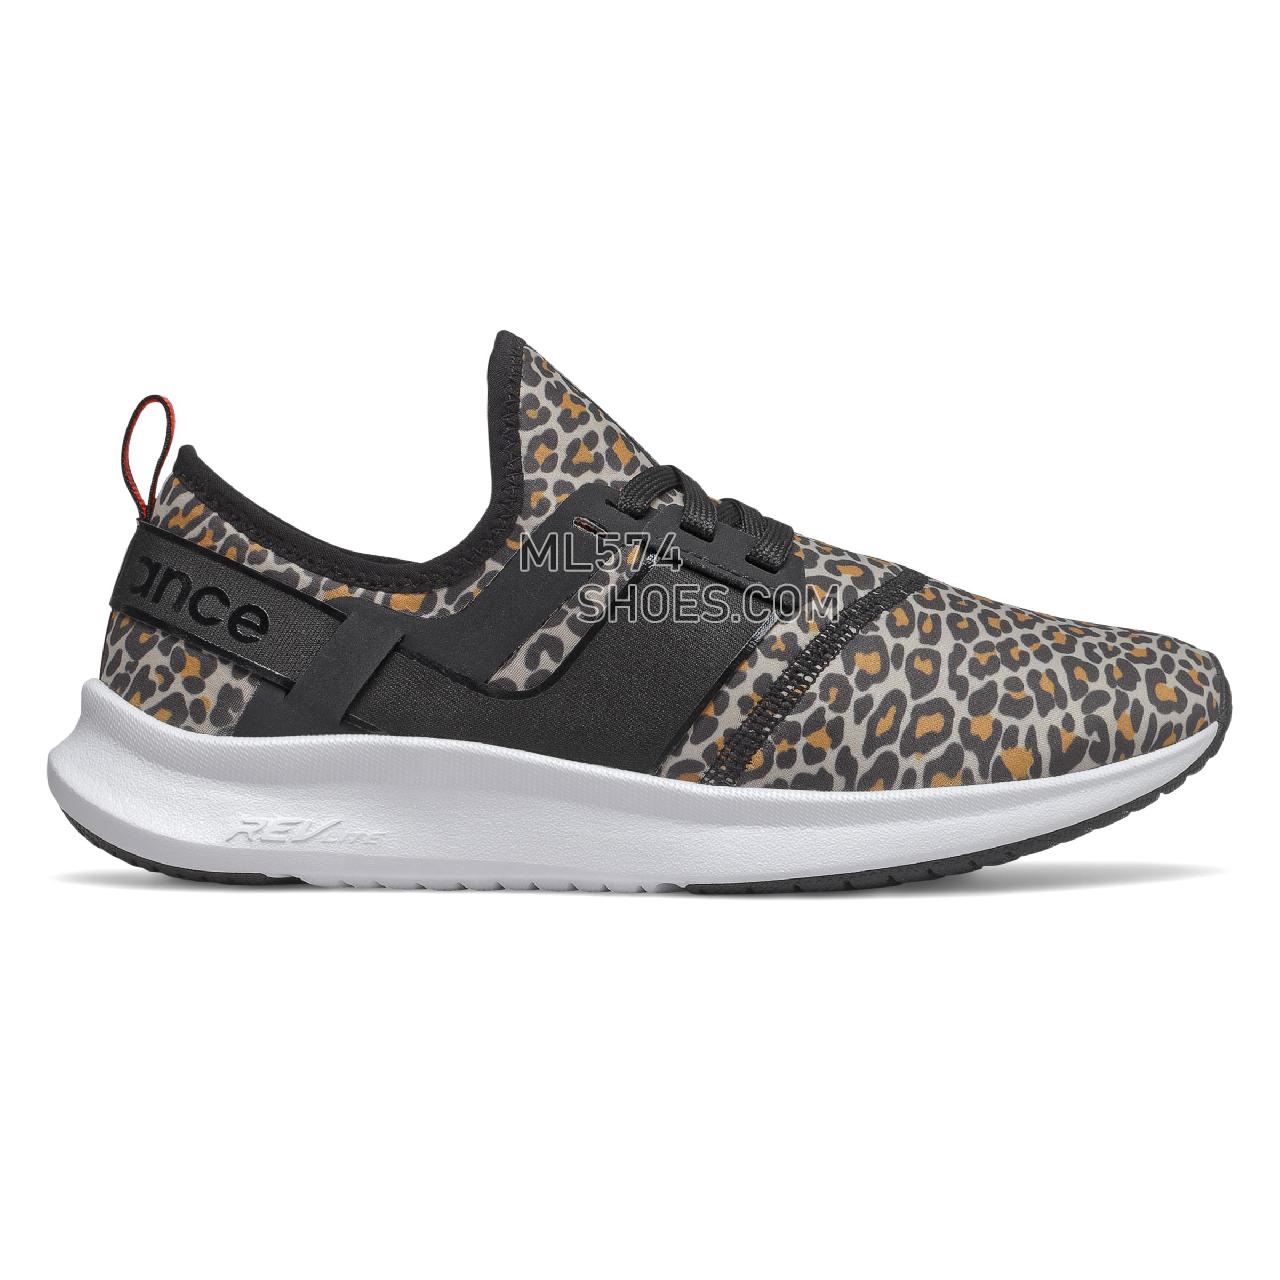 New Balance NB Nergize Sport - Women's Sport Style Sneakers - Black with Leopard Print - WNRGSFR1